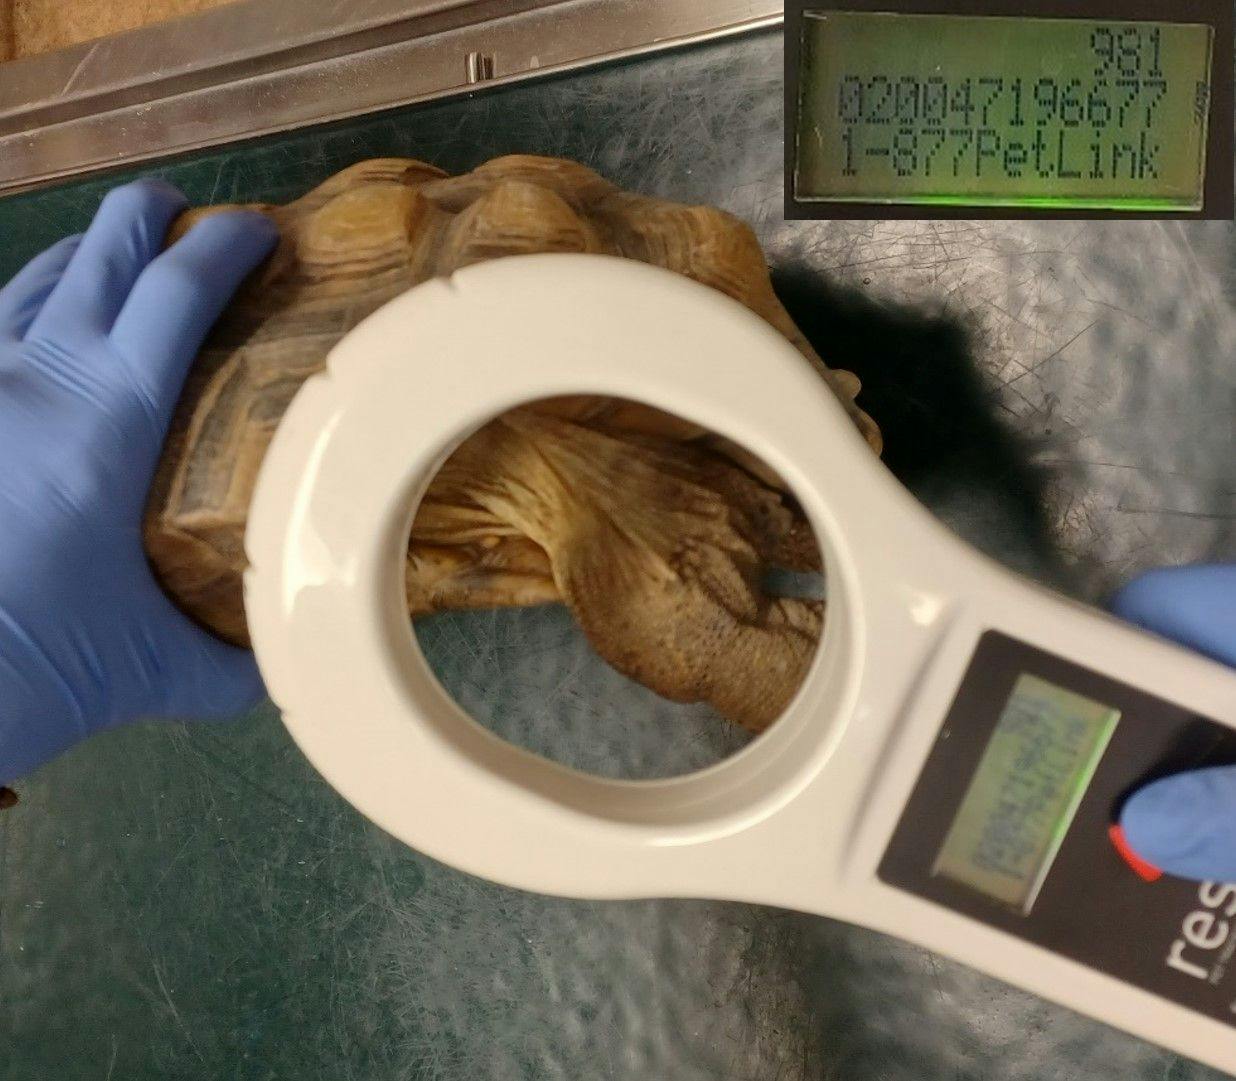 Image 1: A pet California desert tortoise (Gopherus agassizii) is scanned for a microchip in the left prefemoral fossa. Inset is an example of what the microchip reader shows when it scans a microchip. It includes a unique 15-digit number and, in this case, the microchip’s manufacturer registry where the pet owner can upload up-to-date contact information.